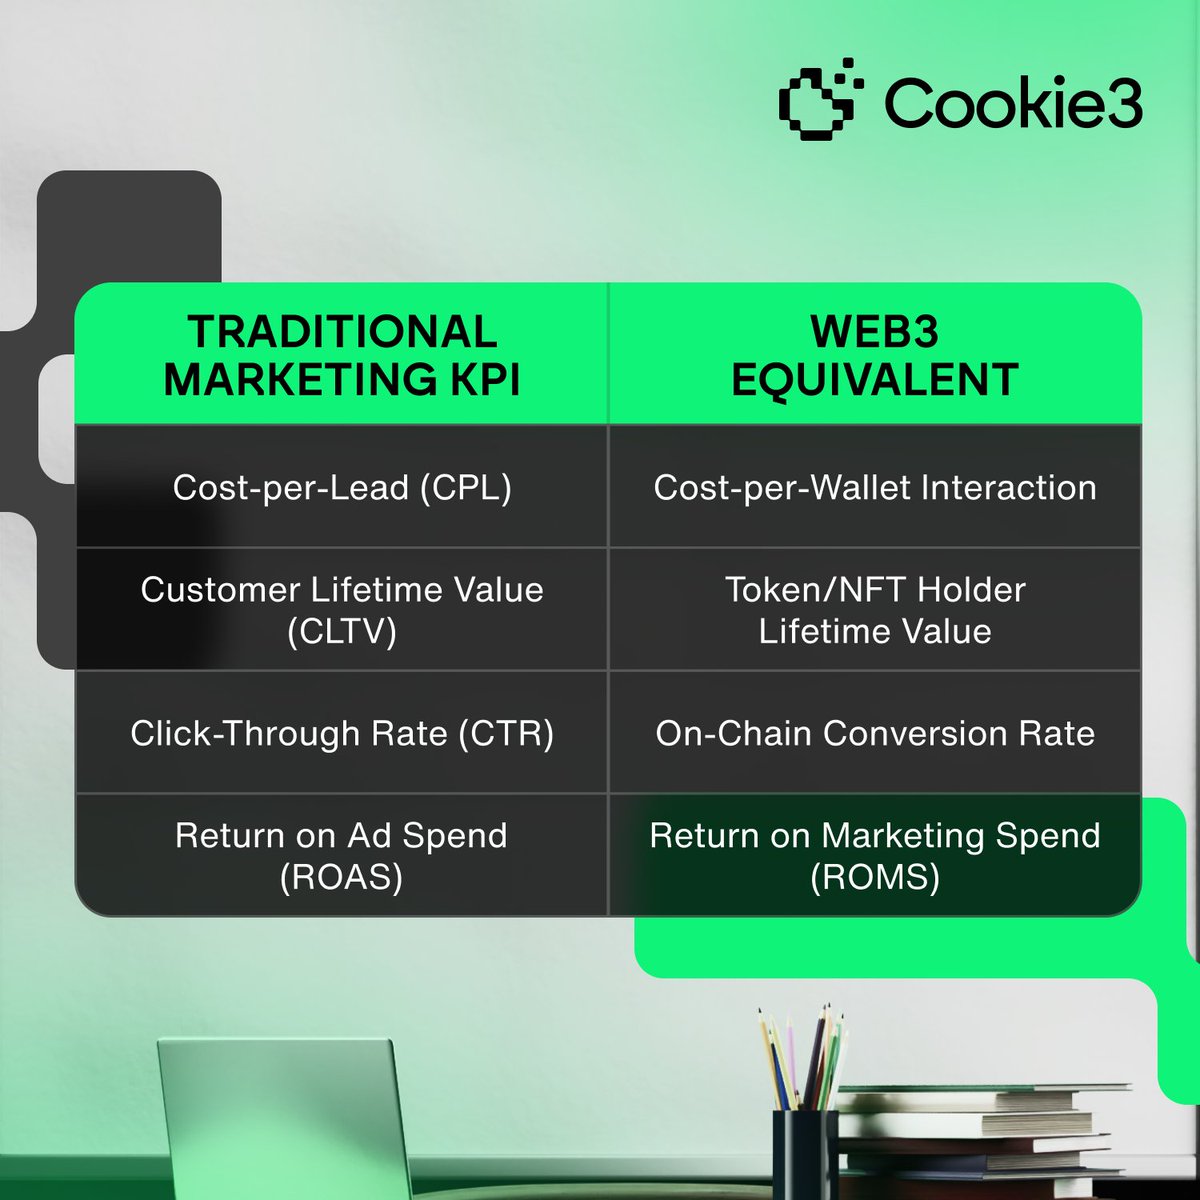 Forget what you know about traditional marketing metrics. Web3 demands a whole new approach. 

Let's dive into how marketing KPIs differ in #Web3 🧵👇